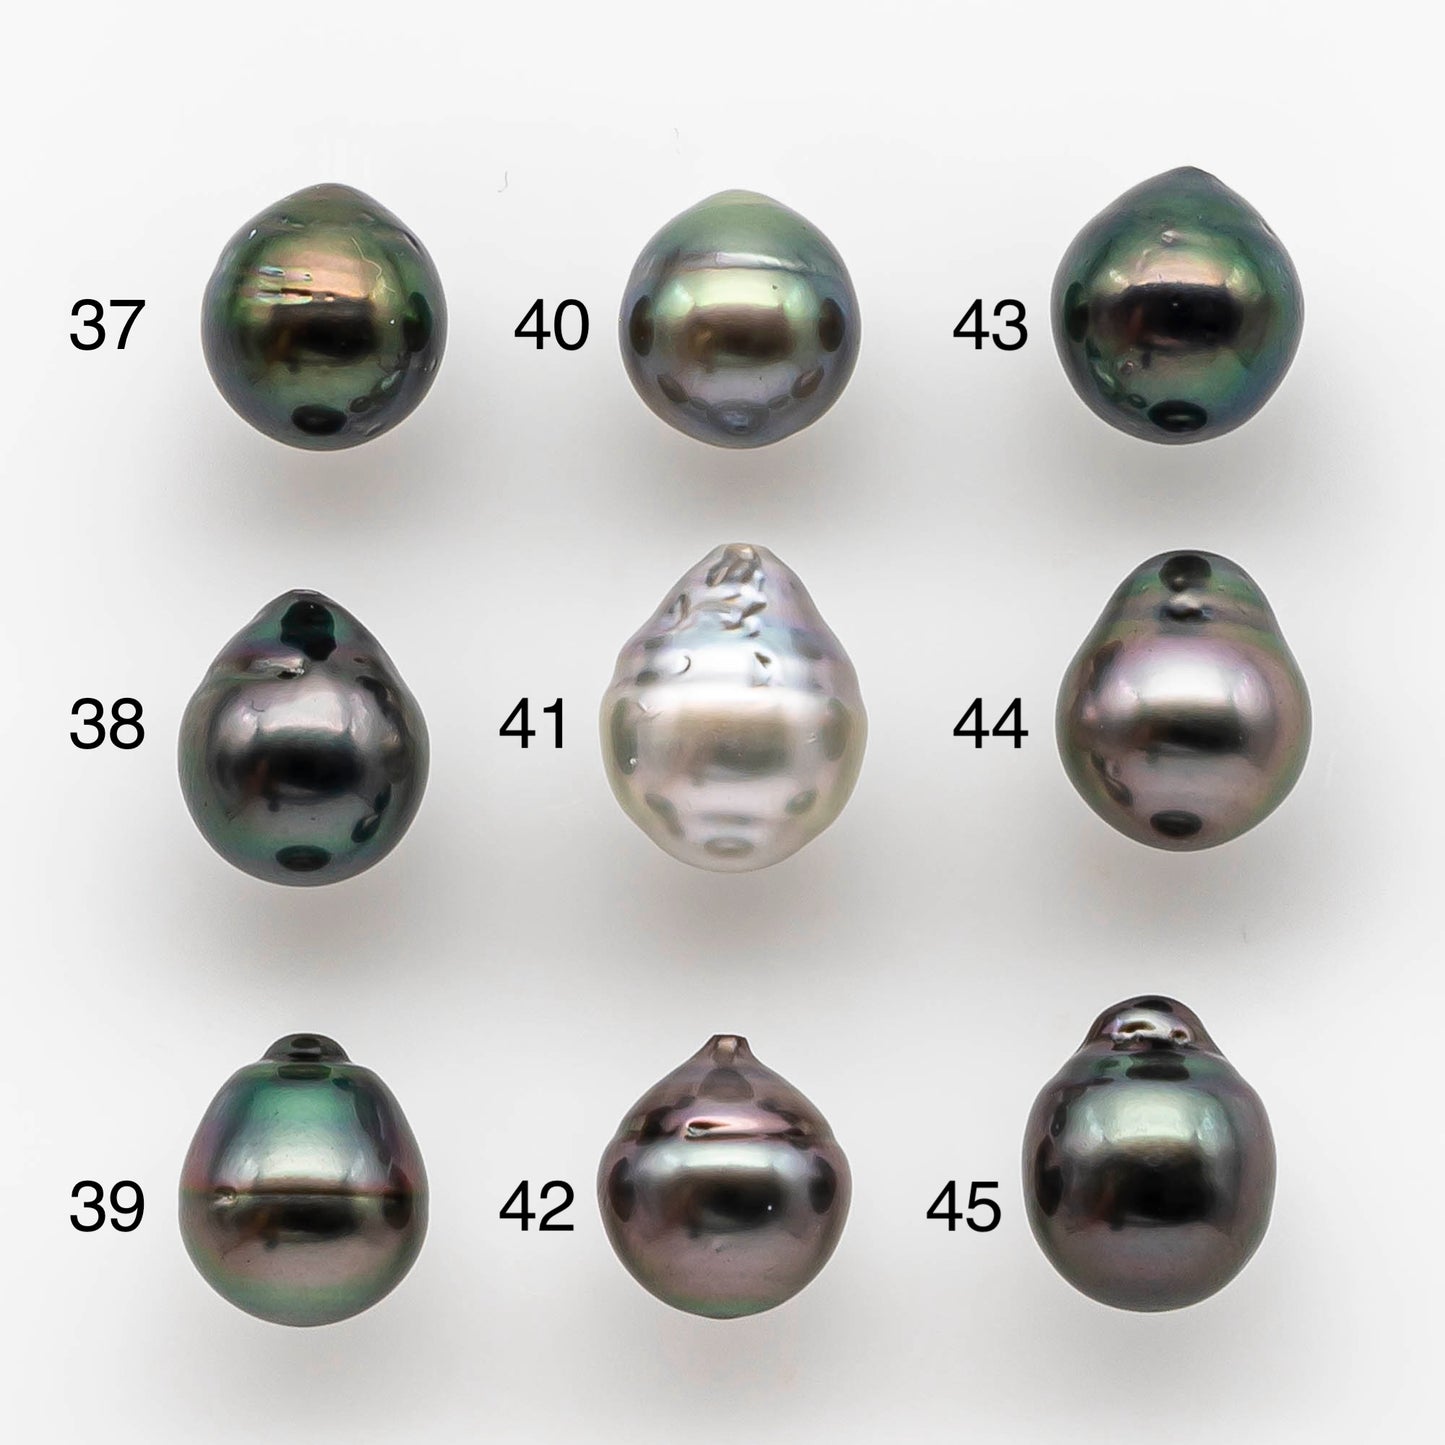 9-10mm Tahitian Pearl Drop with High Luster and Natural Color with Minor Blemishes, Loose Single Piece Half Drilled, SKU # 1895TH